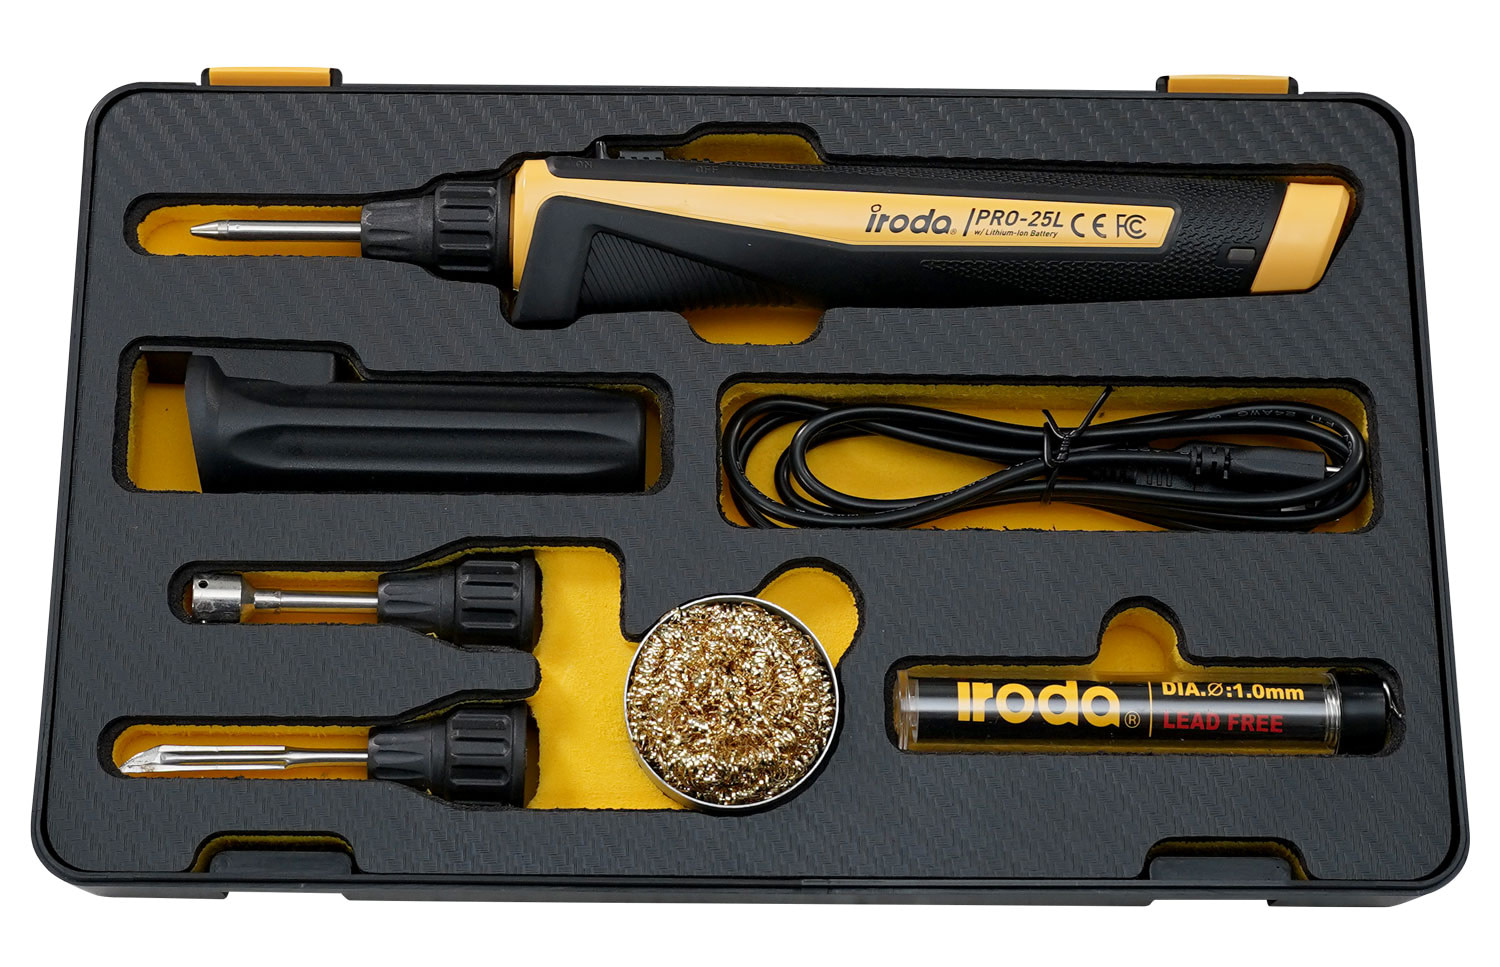 PRO-25L Cordless USB Rechargeable Soldering Iron Kit from Pro-Iroda